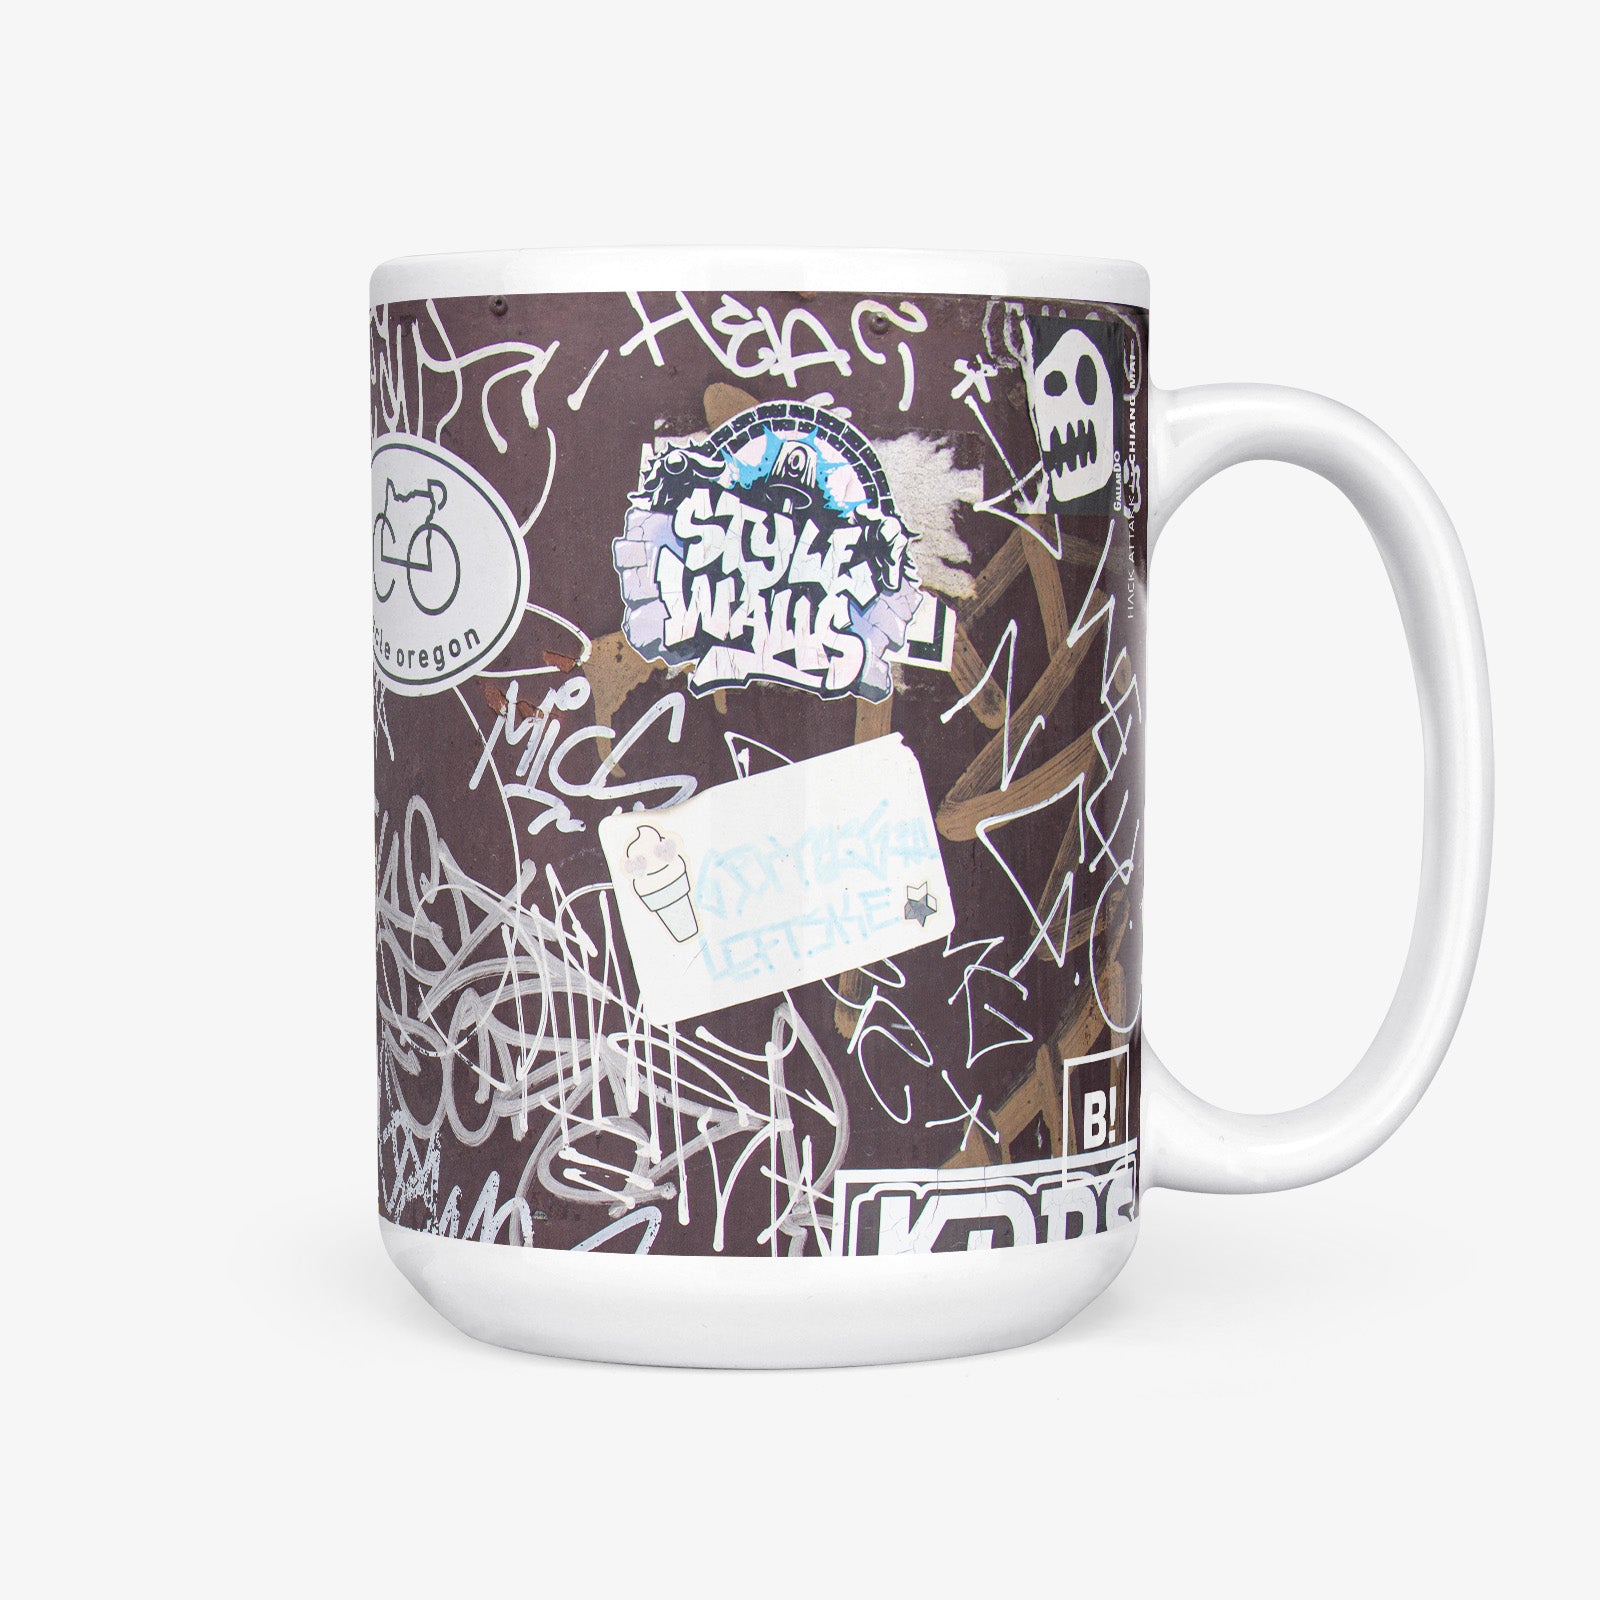 Be inspired by our Urban Art Coffee Mug "Hack Attakk - No1" from Chiang Mai. This mug features an 15oz size with the handle on the right.